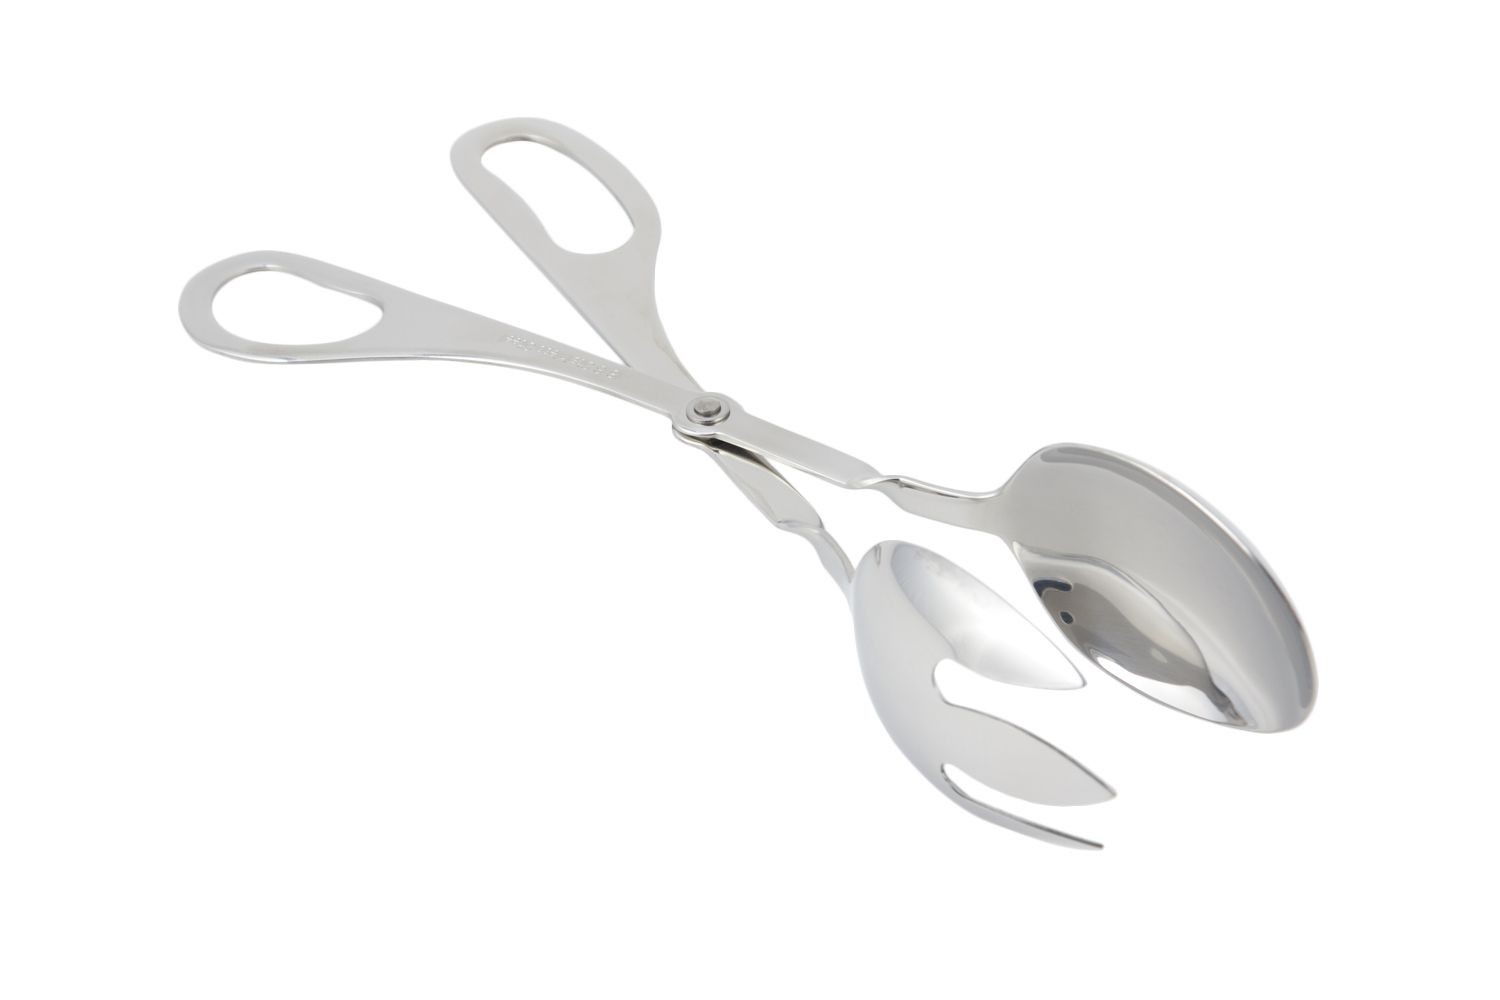 Bon Chef 9089SS Stainless Steel Salad Tongs, 11 1/2" Set of 6